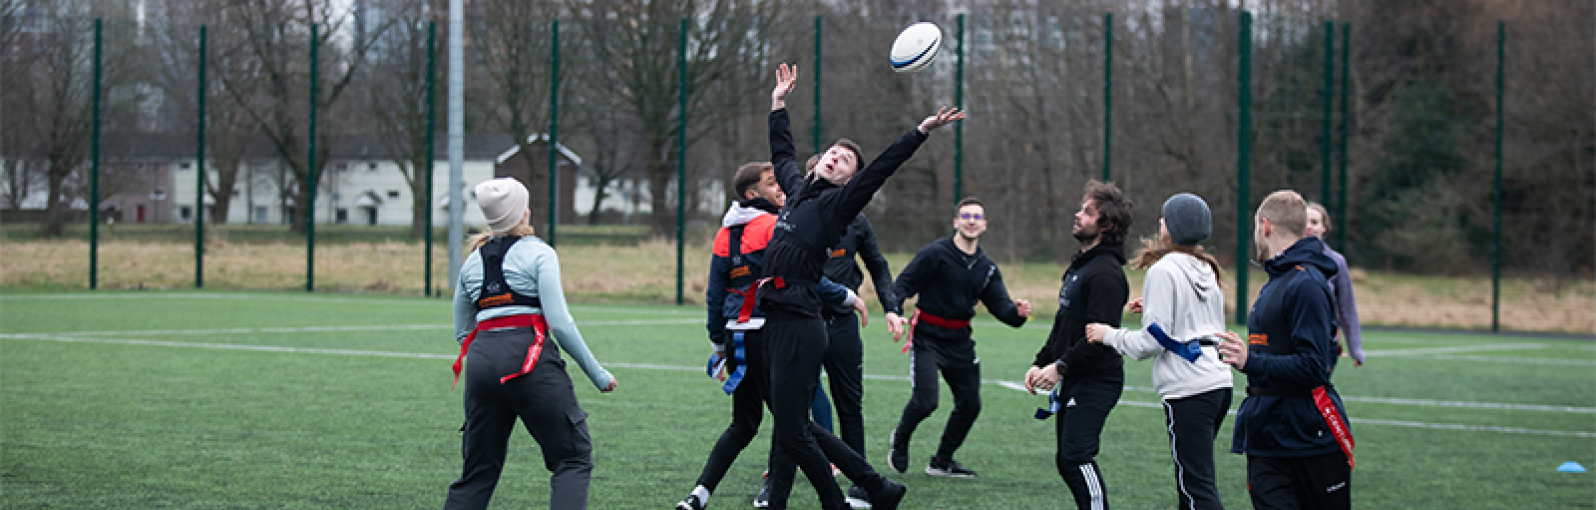 Students wearing GPS trackers and playing rugby